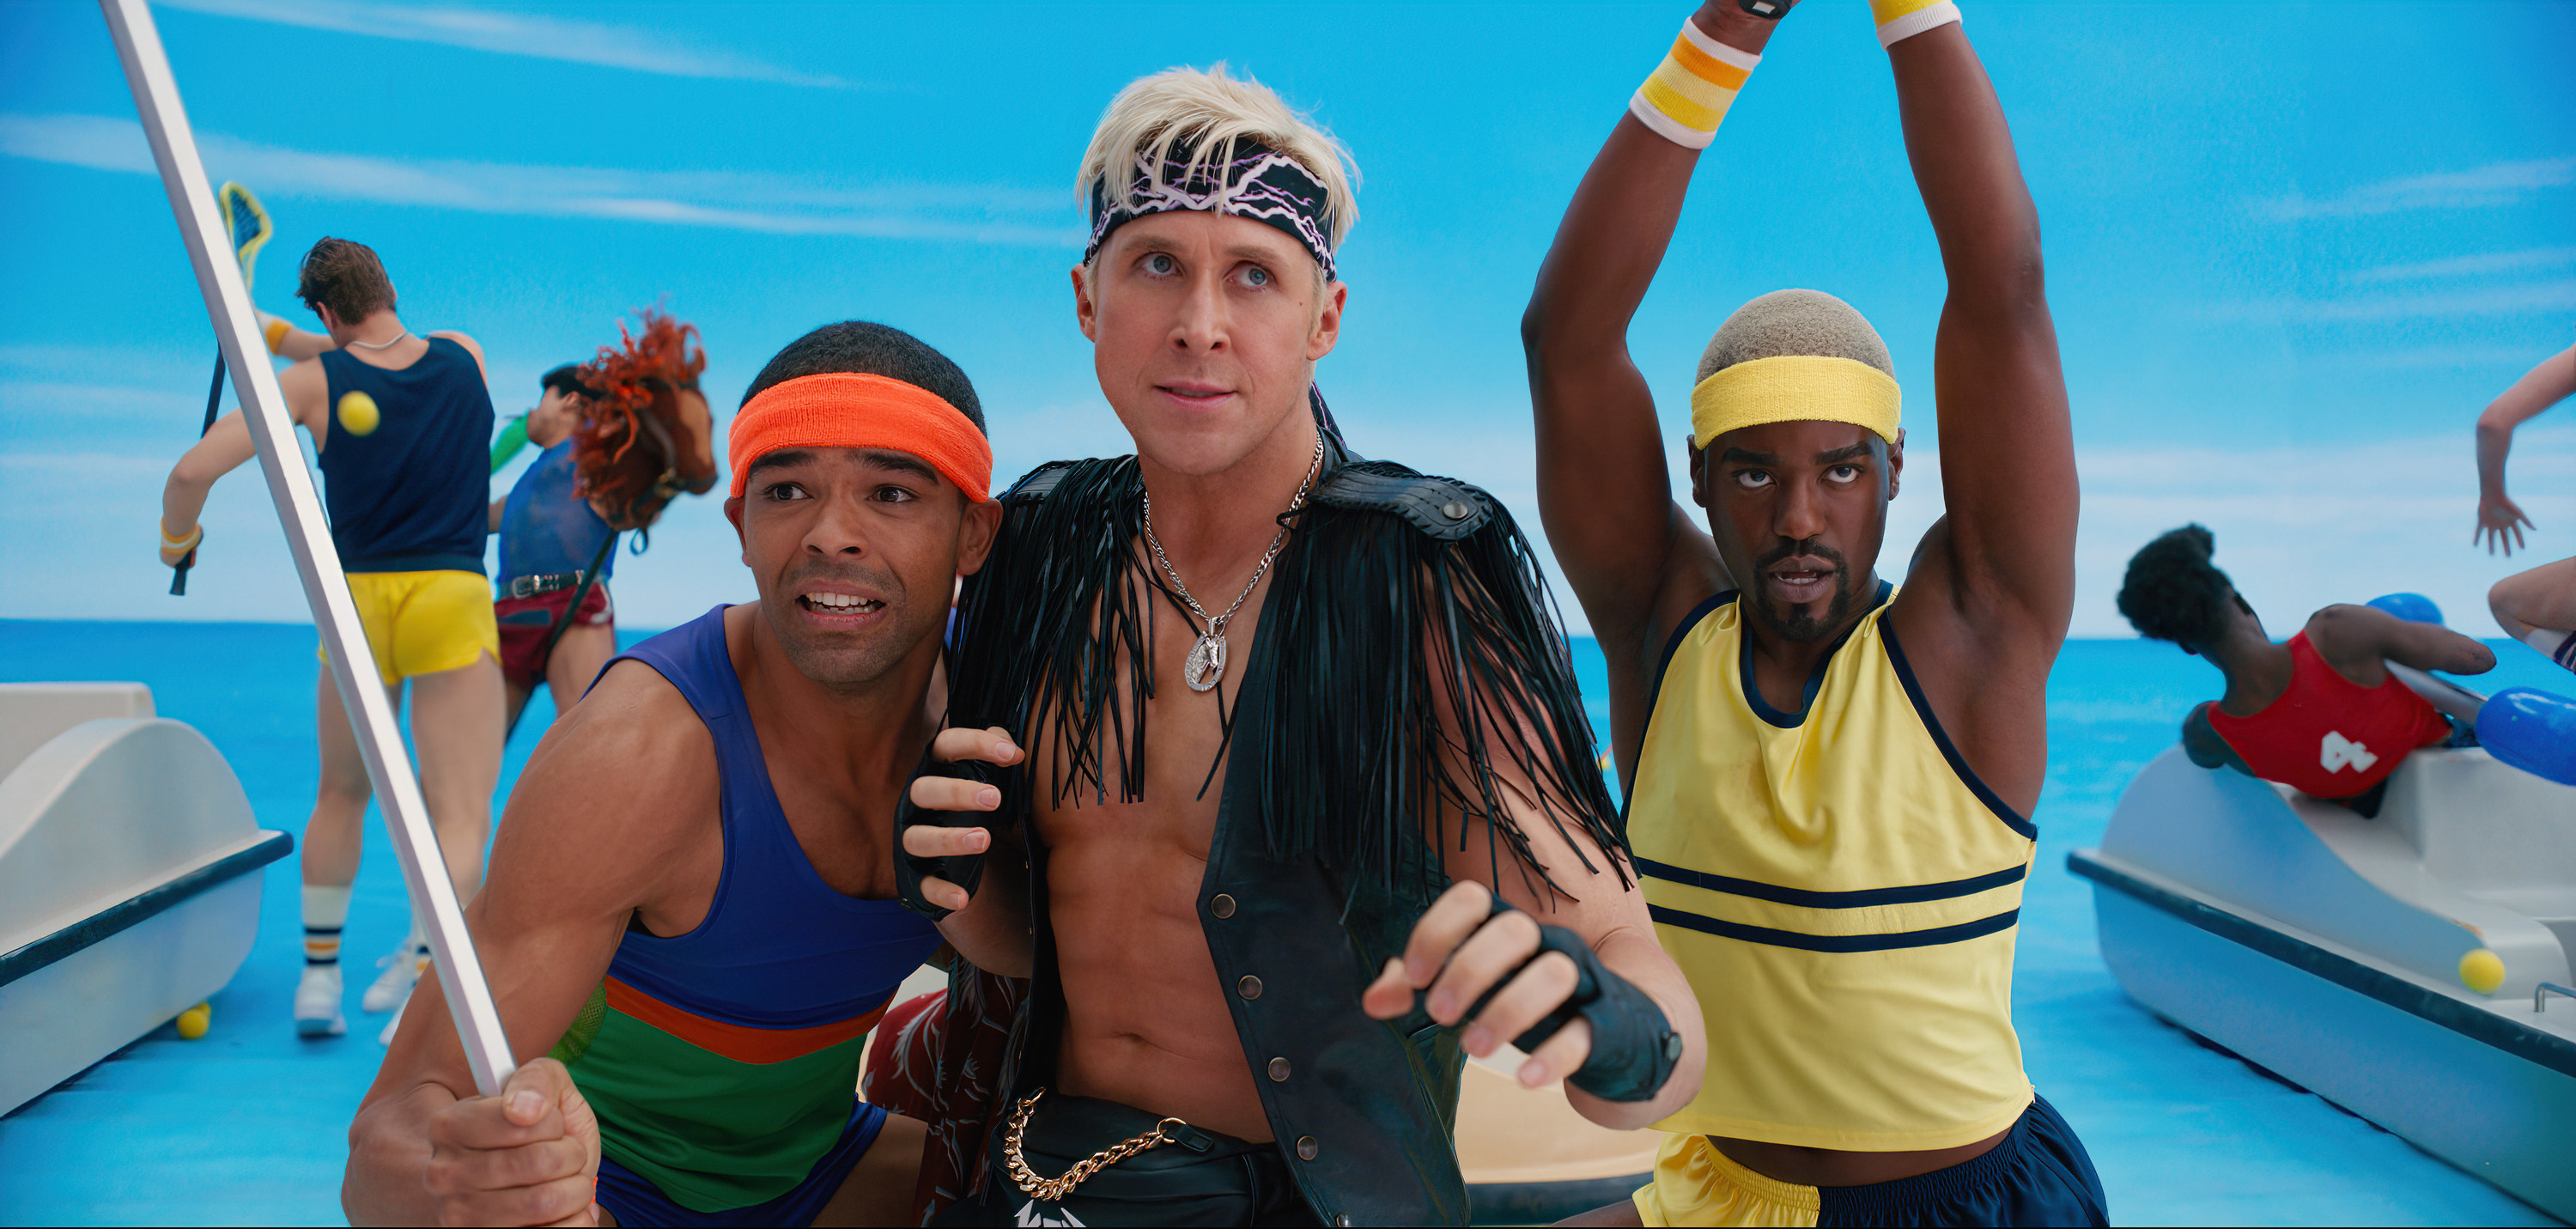 The three in different costumes, including tank tops, a vest with tassels, and headbands